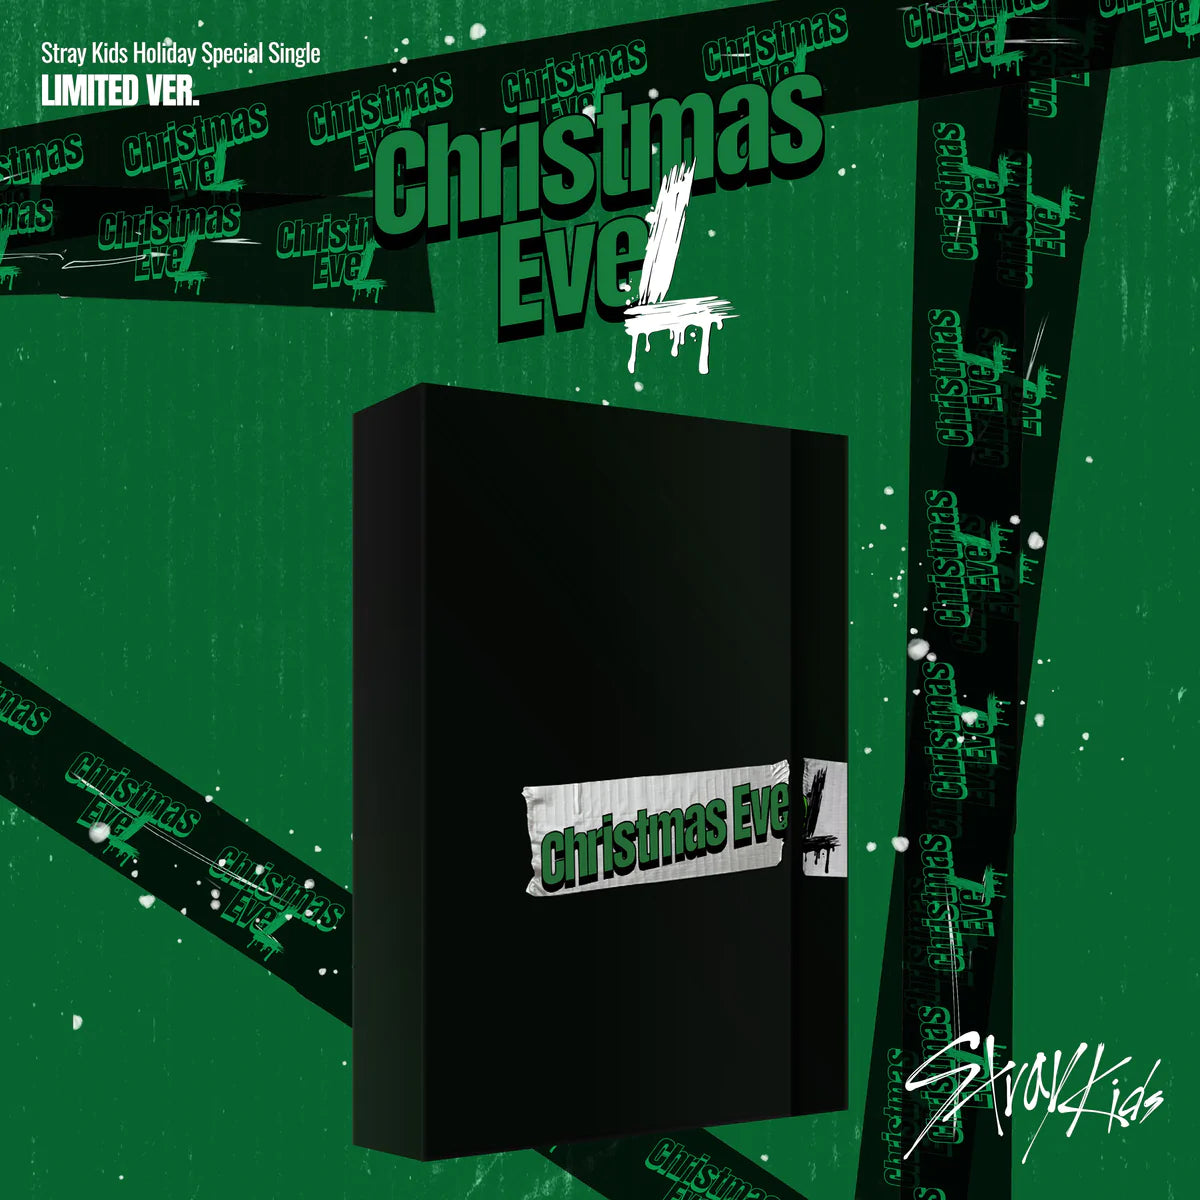 STRAY KIDS – Holiday Special Single [Christmas EveL] (Limited)